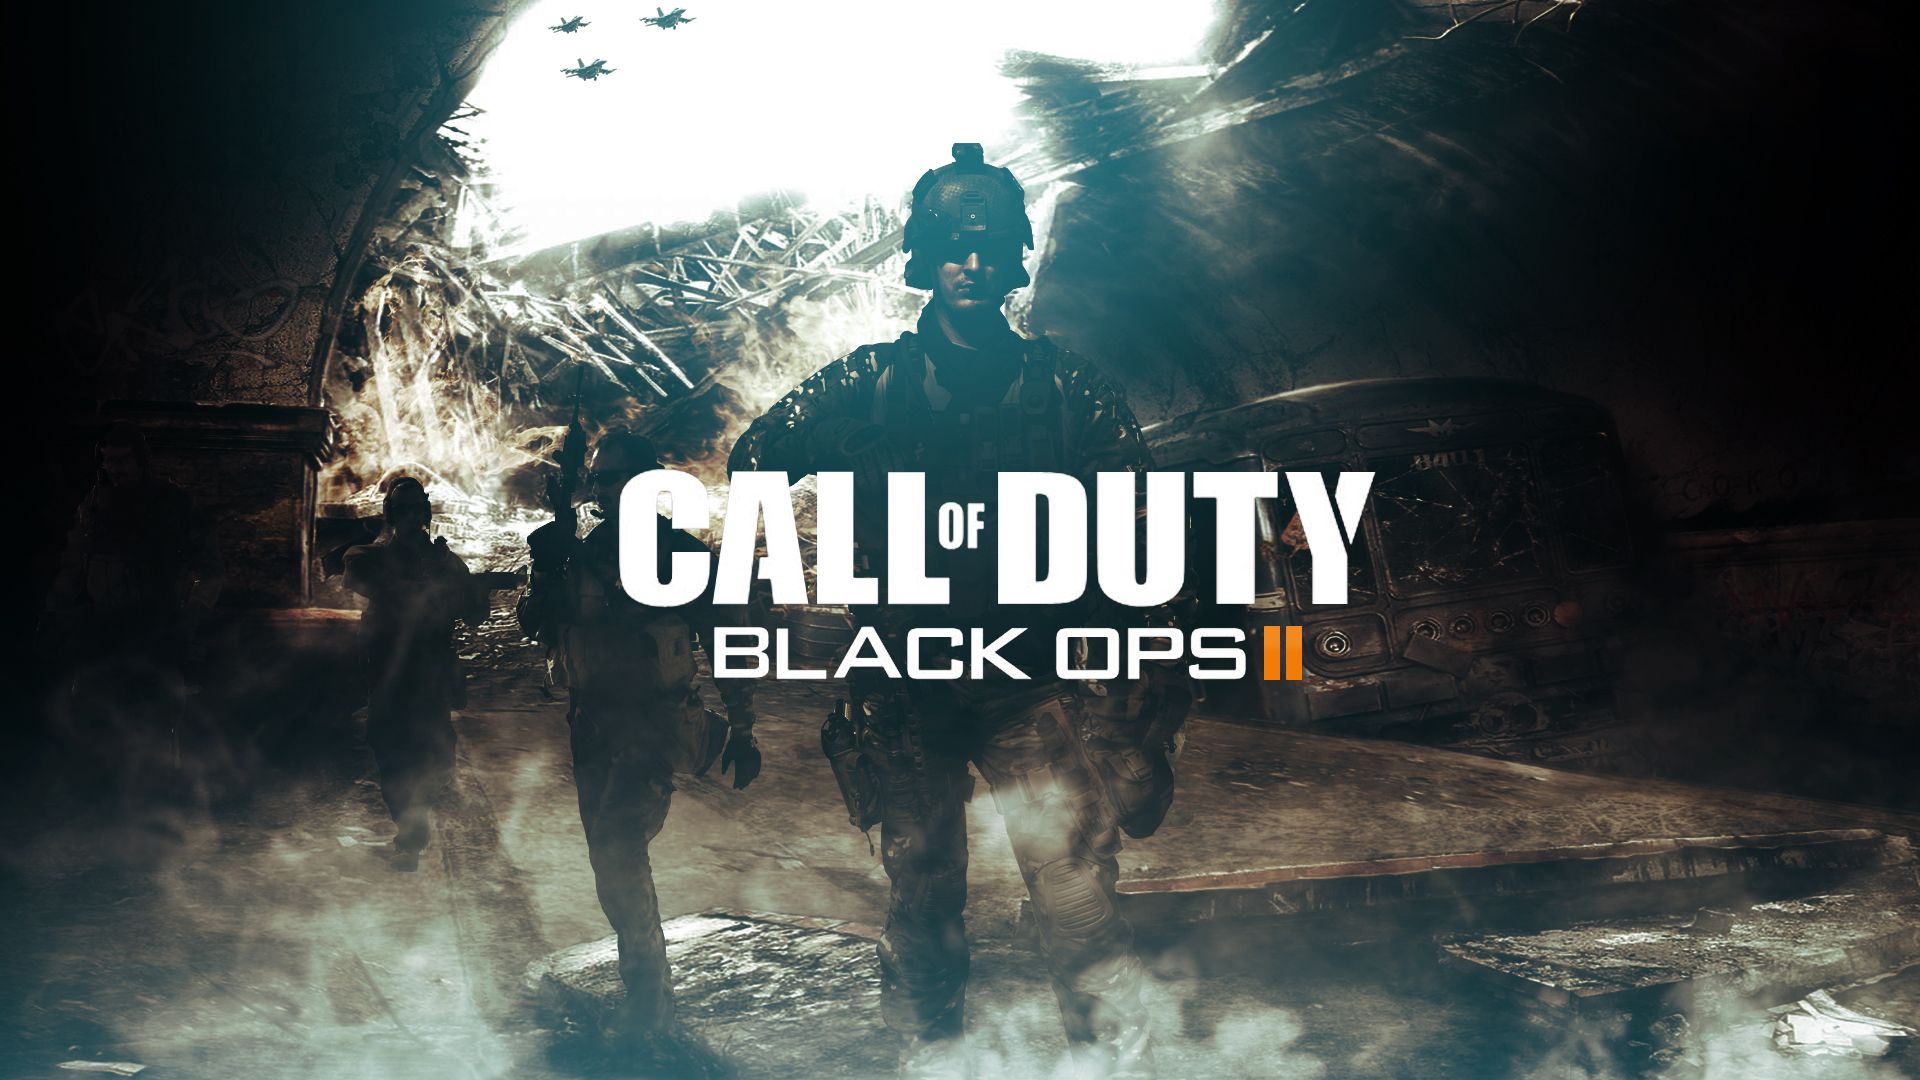 BO2] 9 years ago today Black Ops 2 was released : r/CallOfDuty